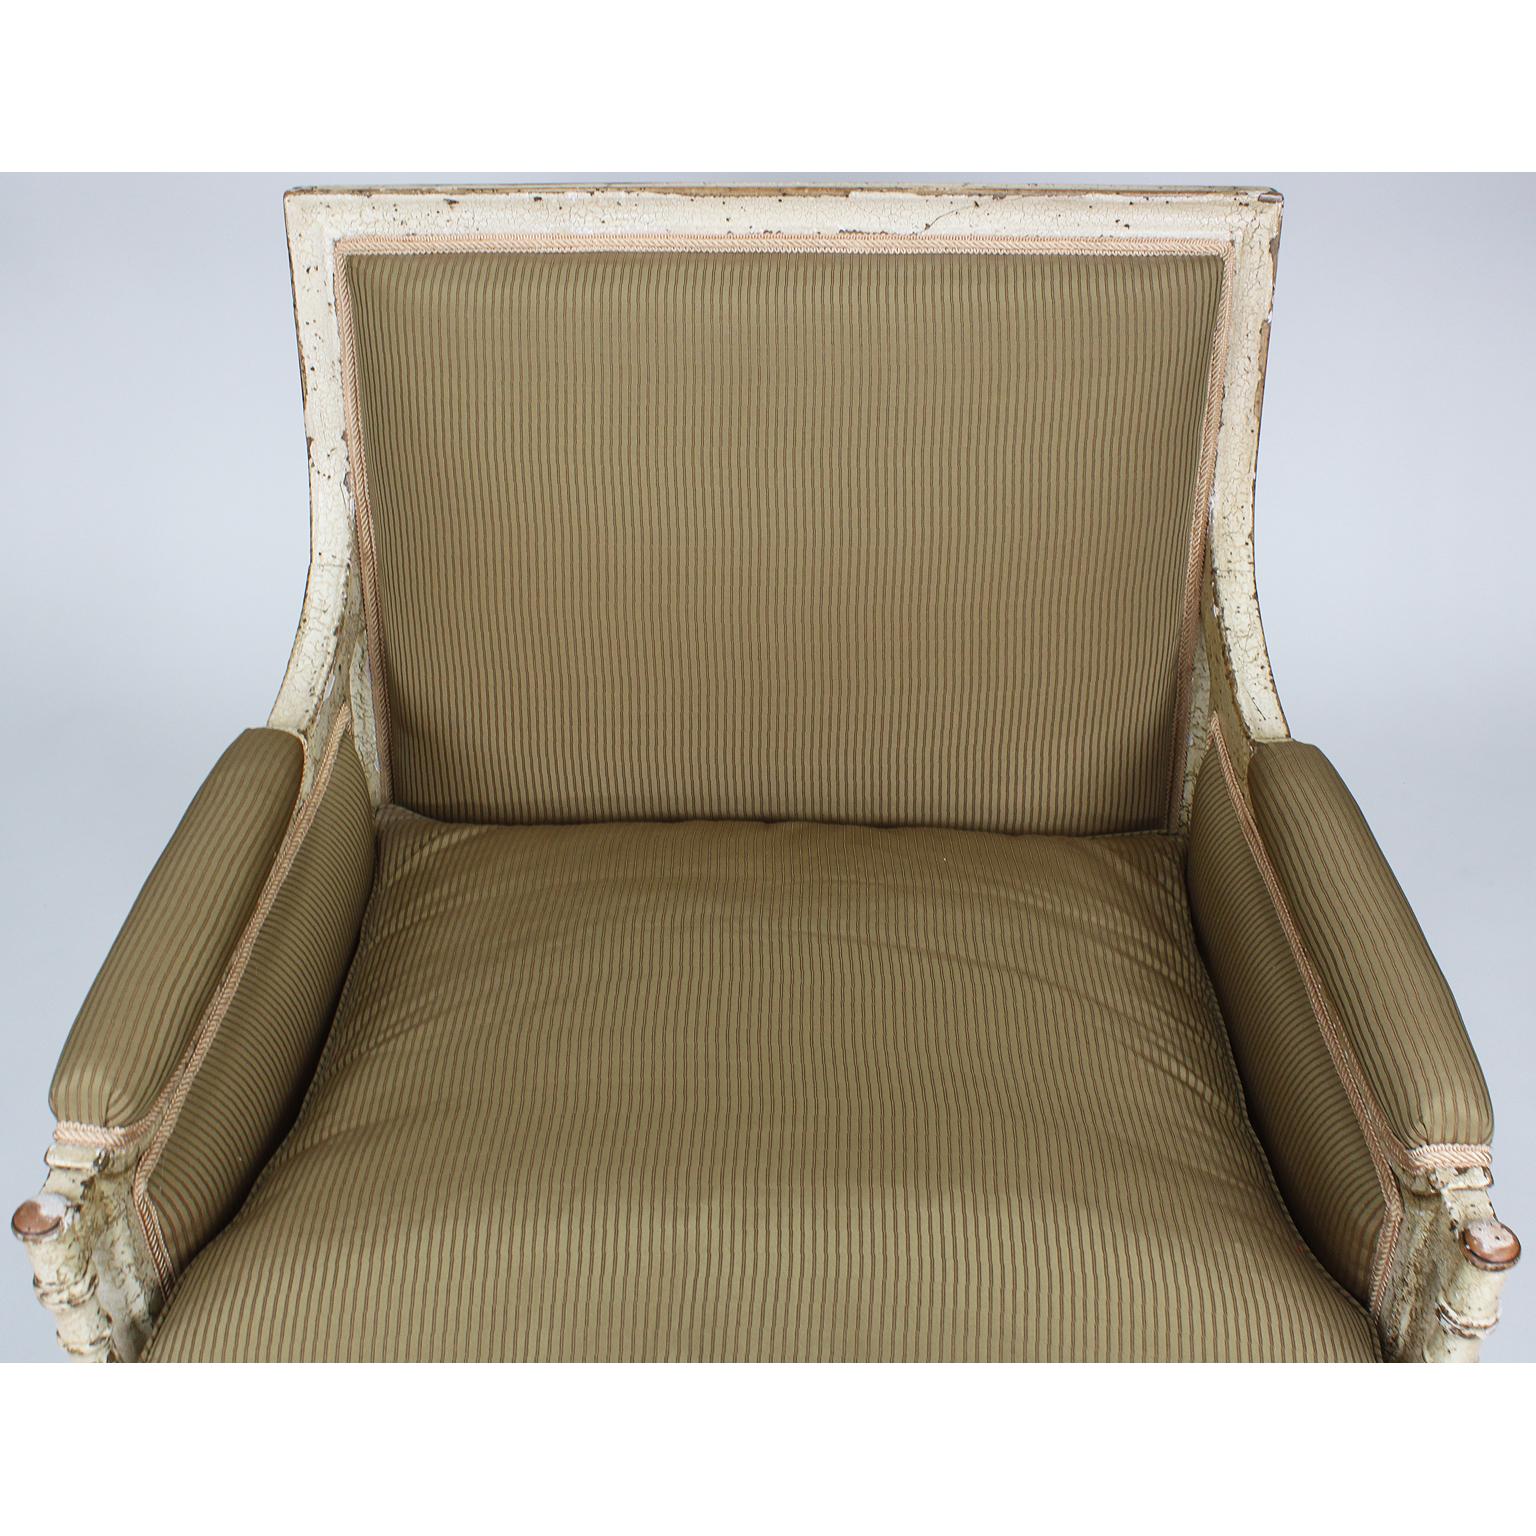 Hand-Carved French 19th Century Louis XVI Style White-Painted Lounge Chaise Ottoman Armchair For Sale